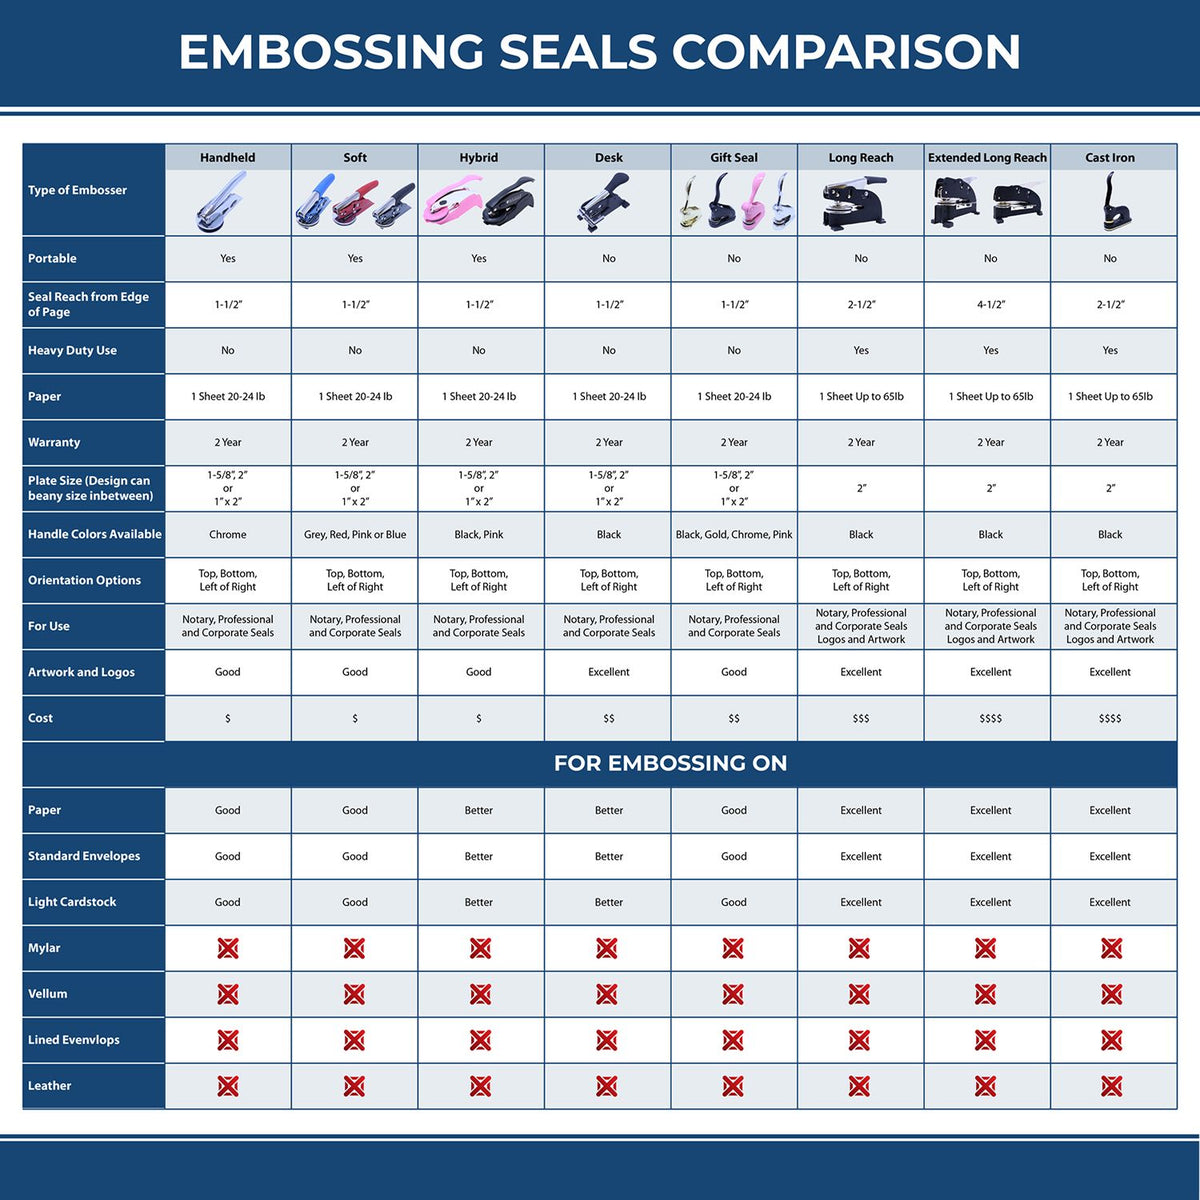 A comparison chart for the different types of mount models available for the Hybrid Kentucky Land Surveyor Seal